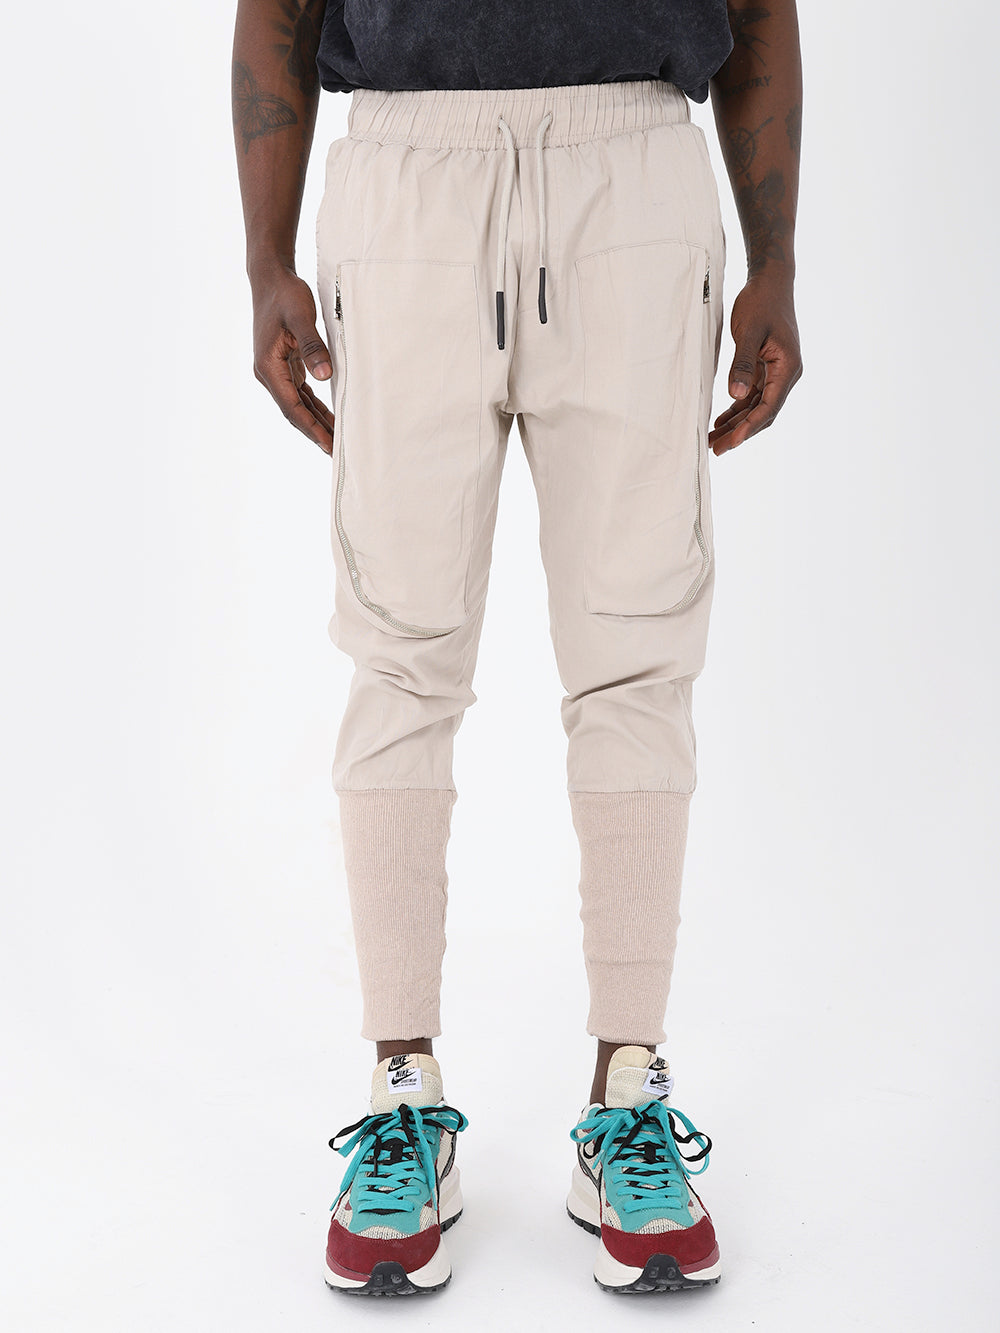 The man is wearing a fashion item - beige Altis jogger pants with an adjustable drawstring waist.